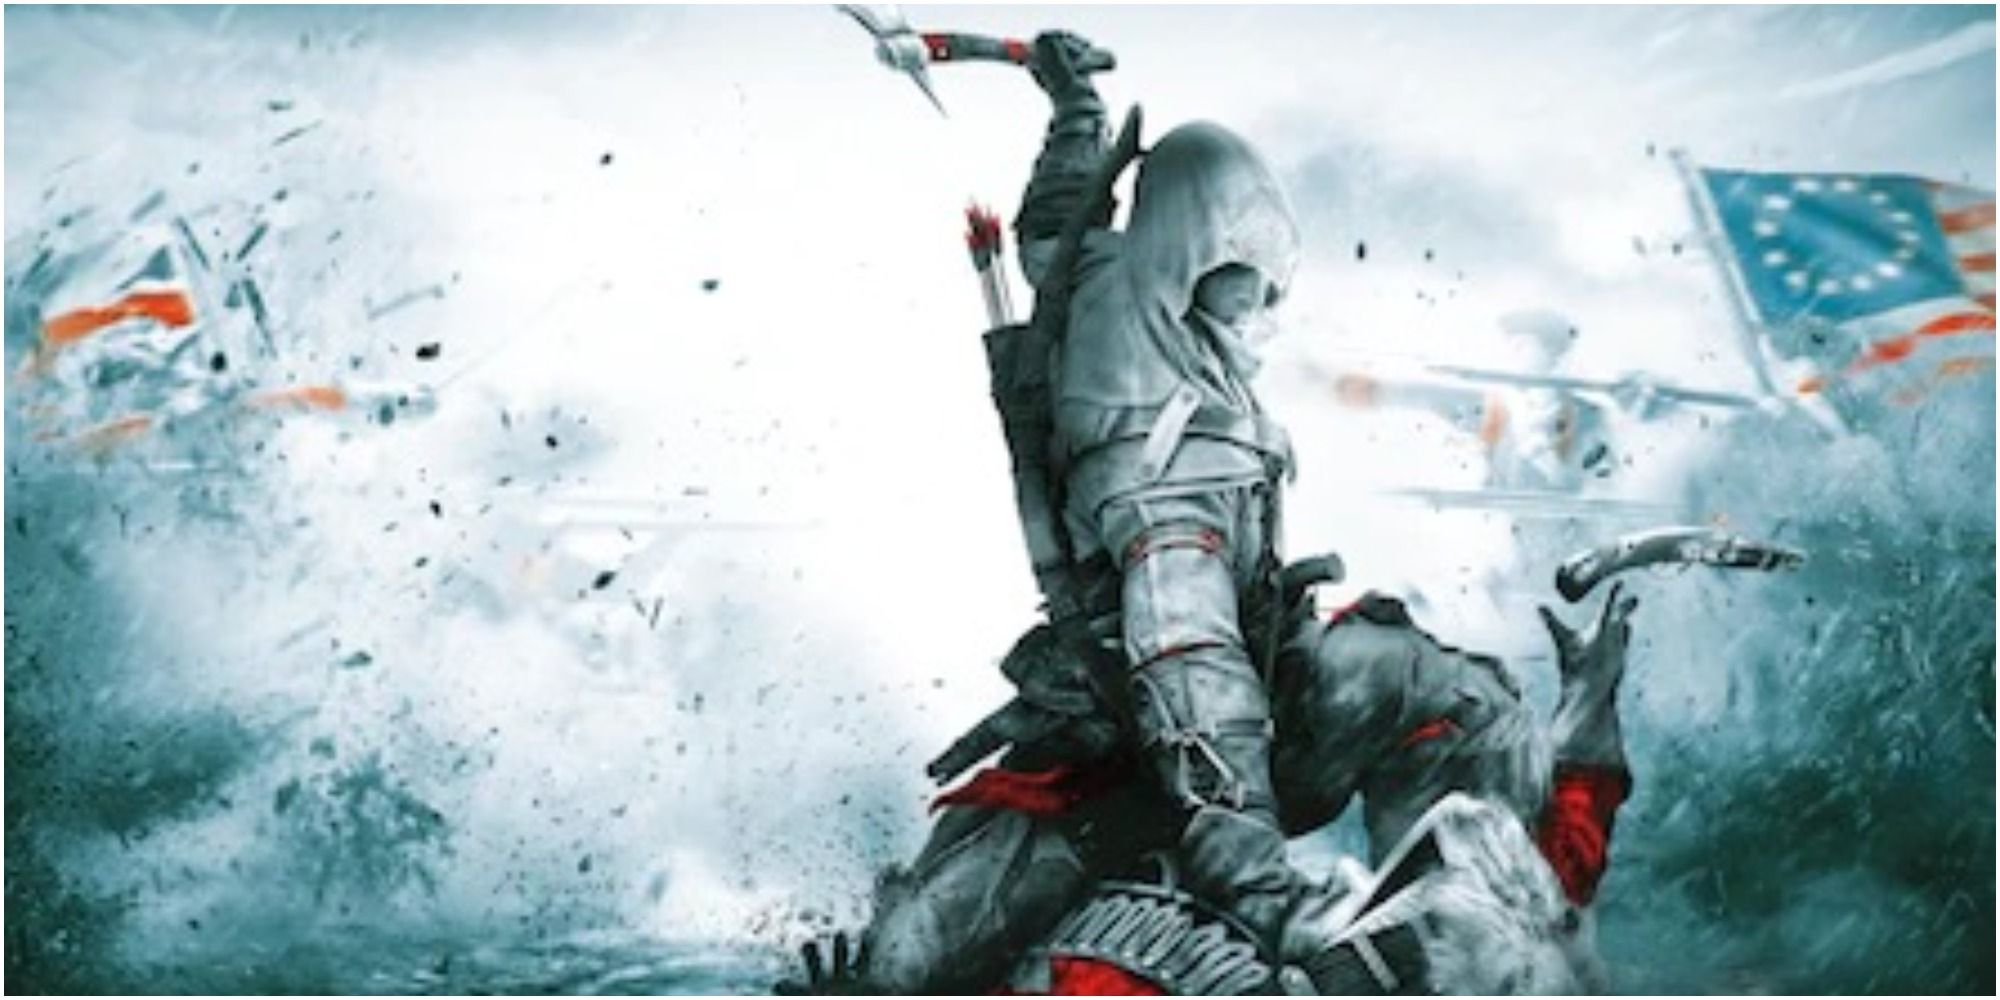 An assassin about to kill a British redcoat on the box art from Assassin's Creed III.